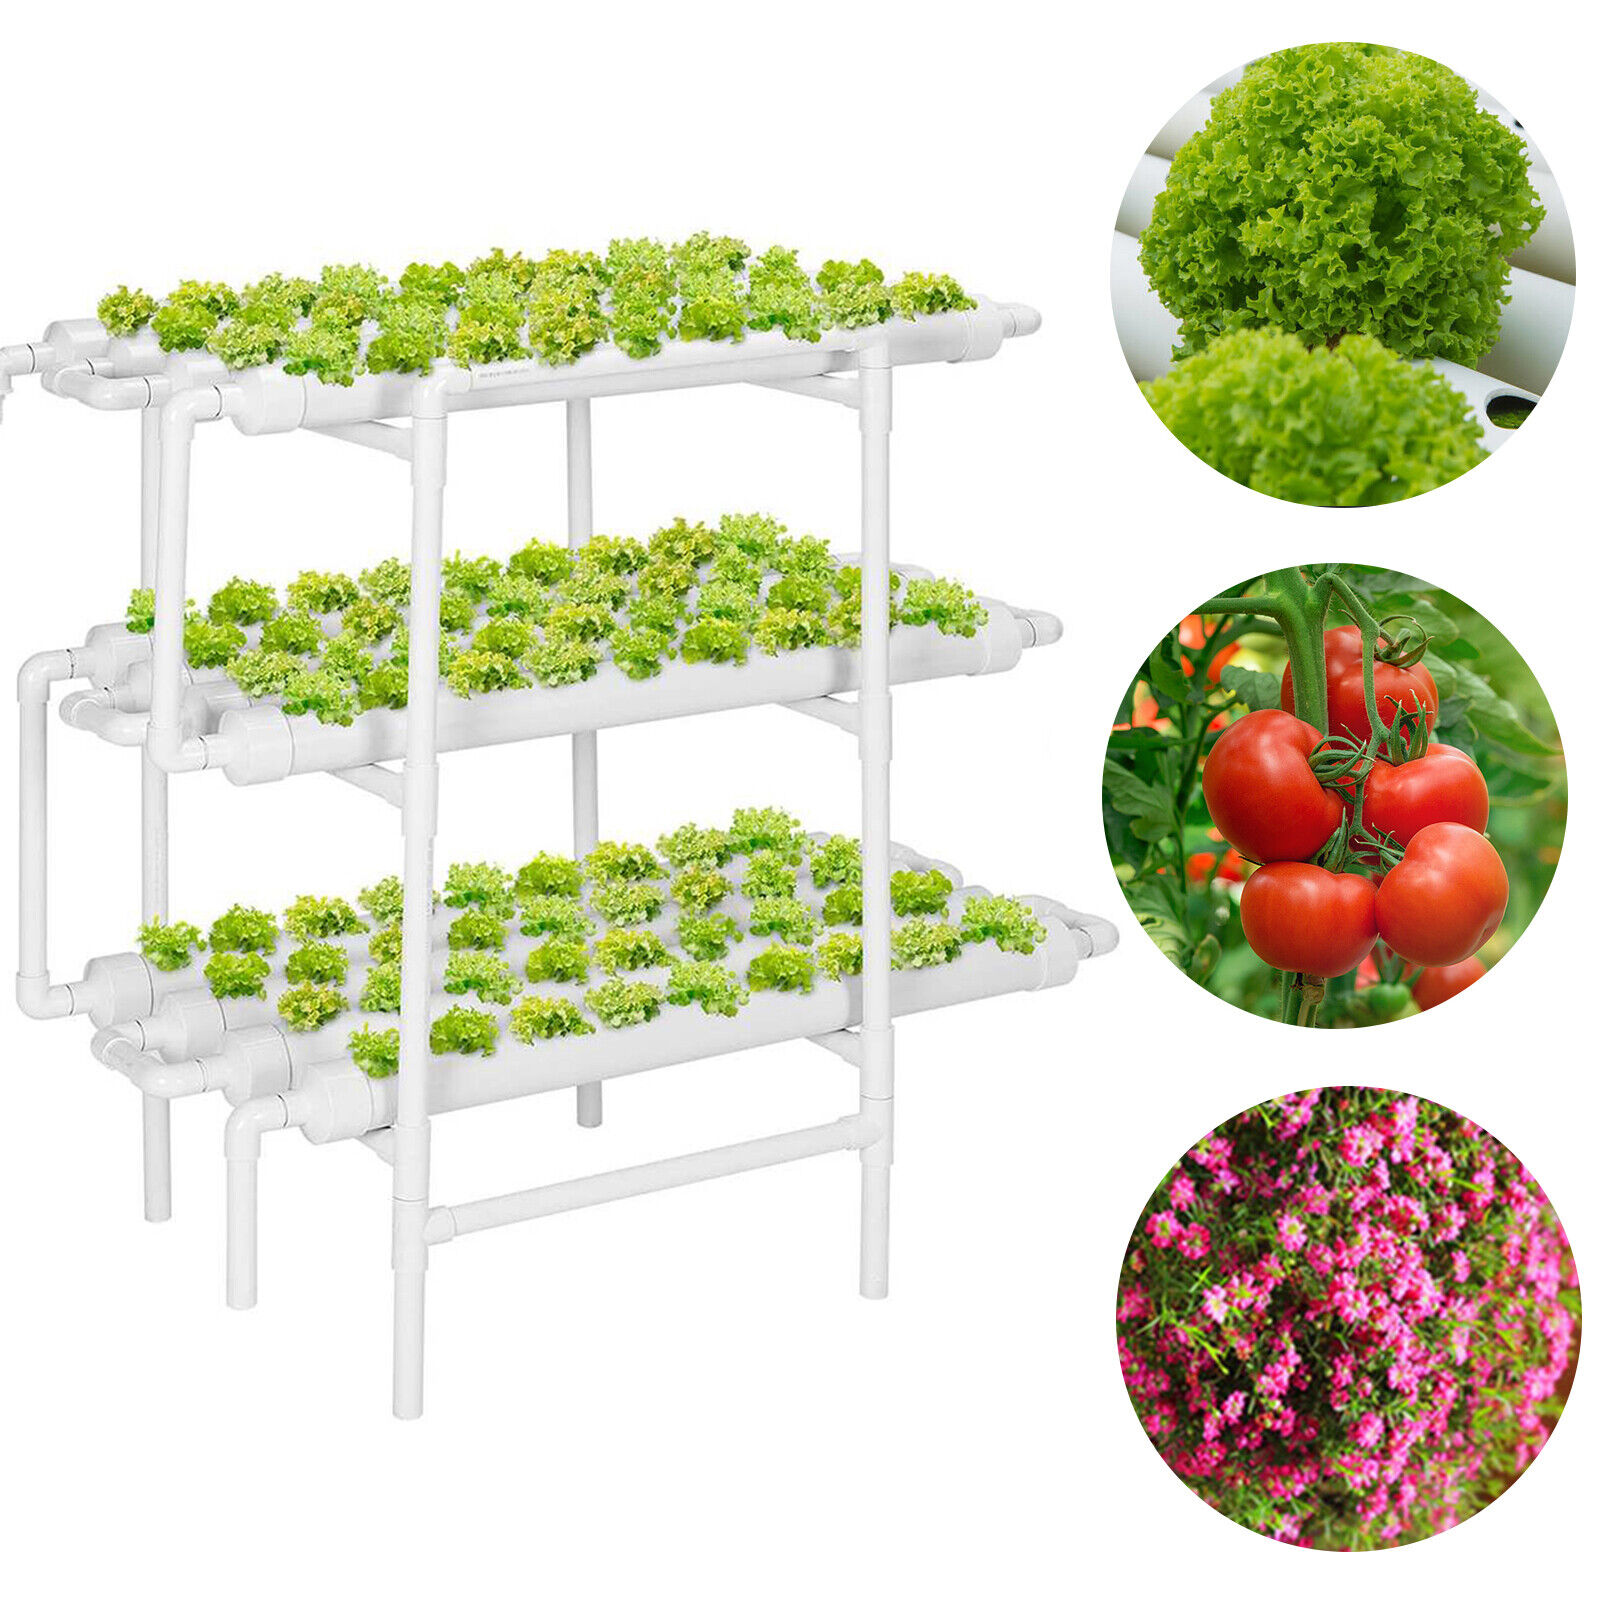 Hydroponic Grow Kit 3 Layer 108 Plant Sites 12 Pipe Garden System Vegetable Tool